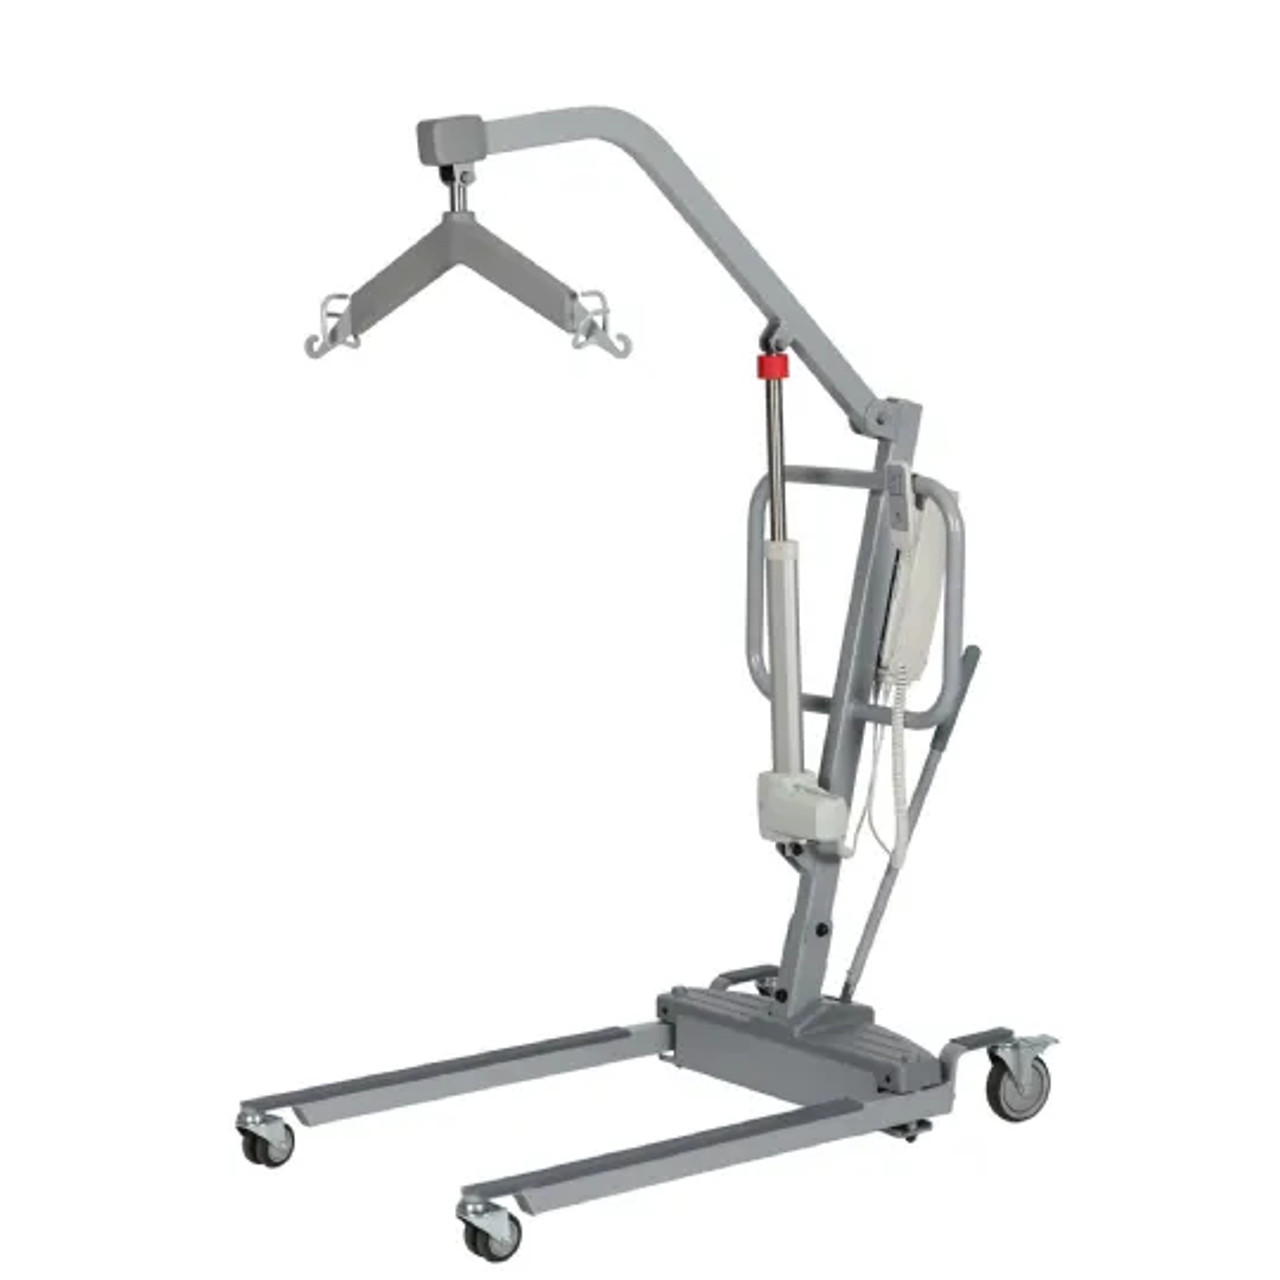 CostCare L400C Electric Patient Lift - Safety, Comfort, and Convenience-Chicken Pieces